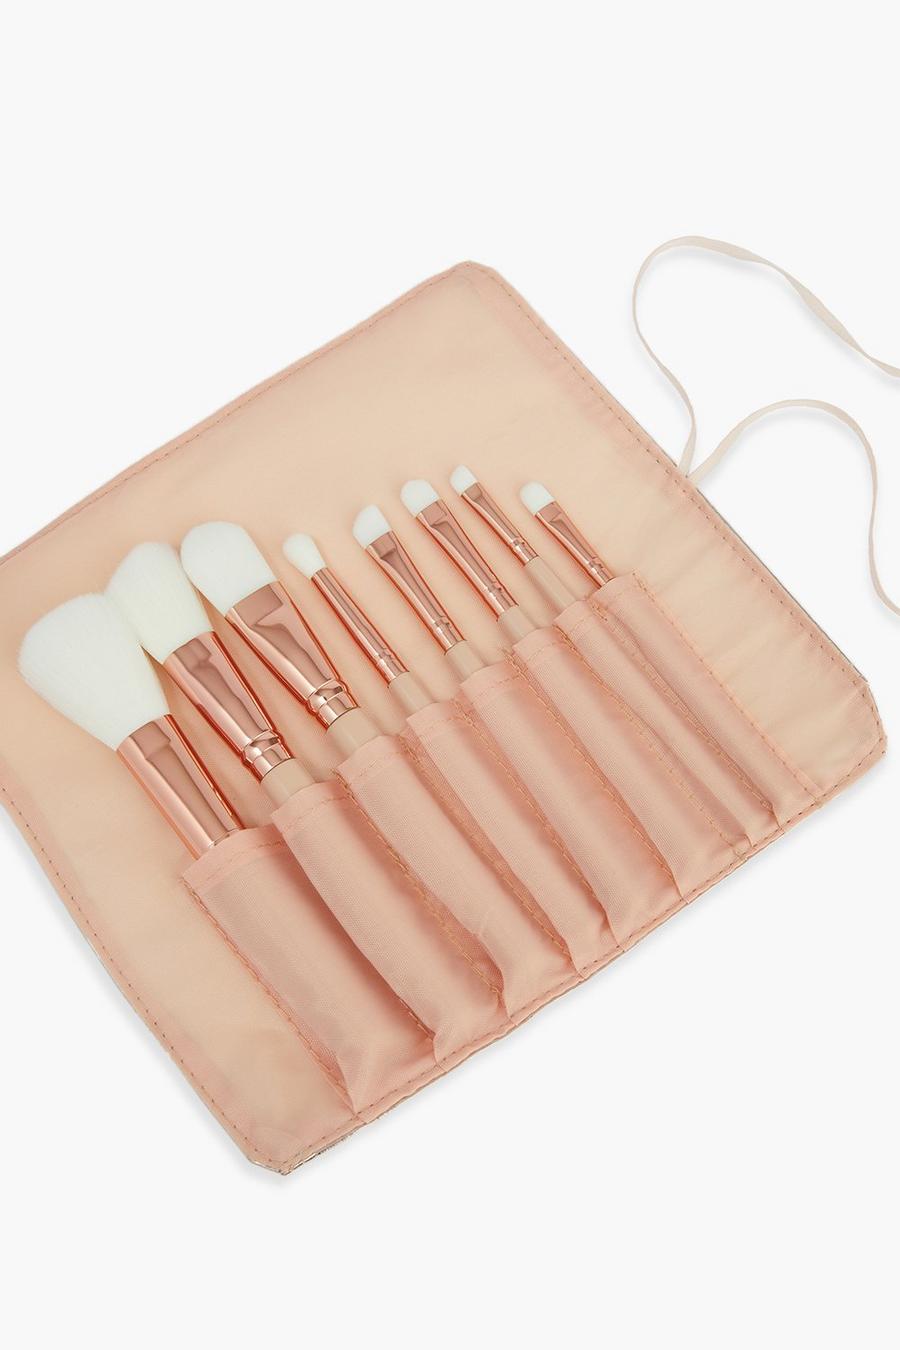 Pink rose Academy Of Colour Brushes Set With Wrap